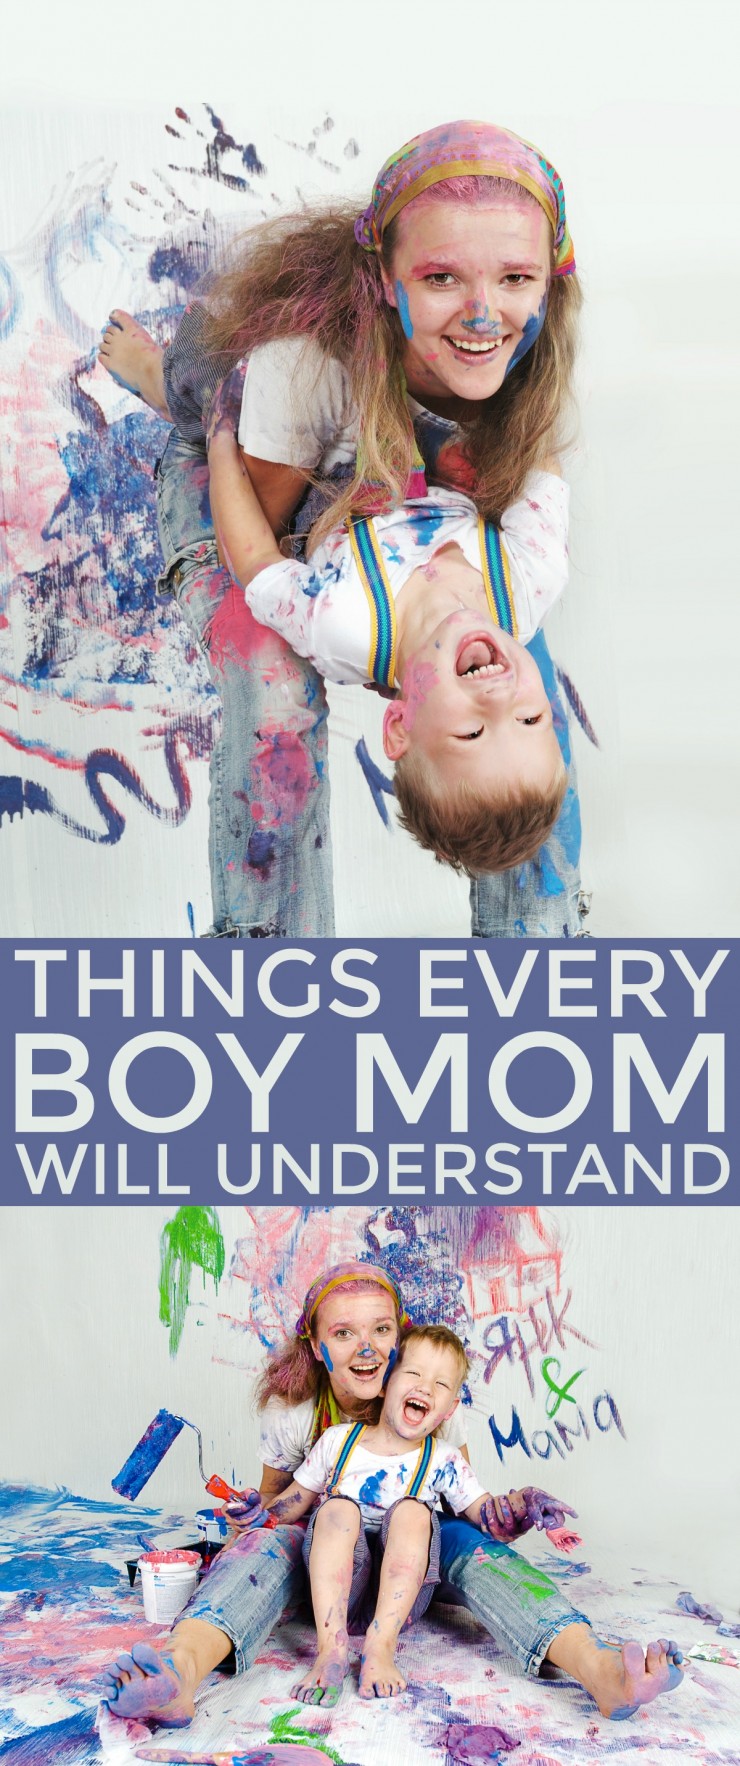 Things Every Boy Mom Will Understand